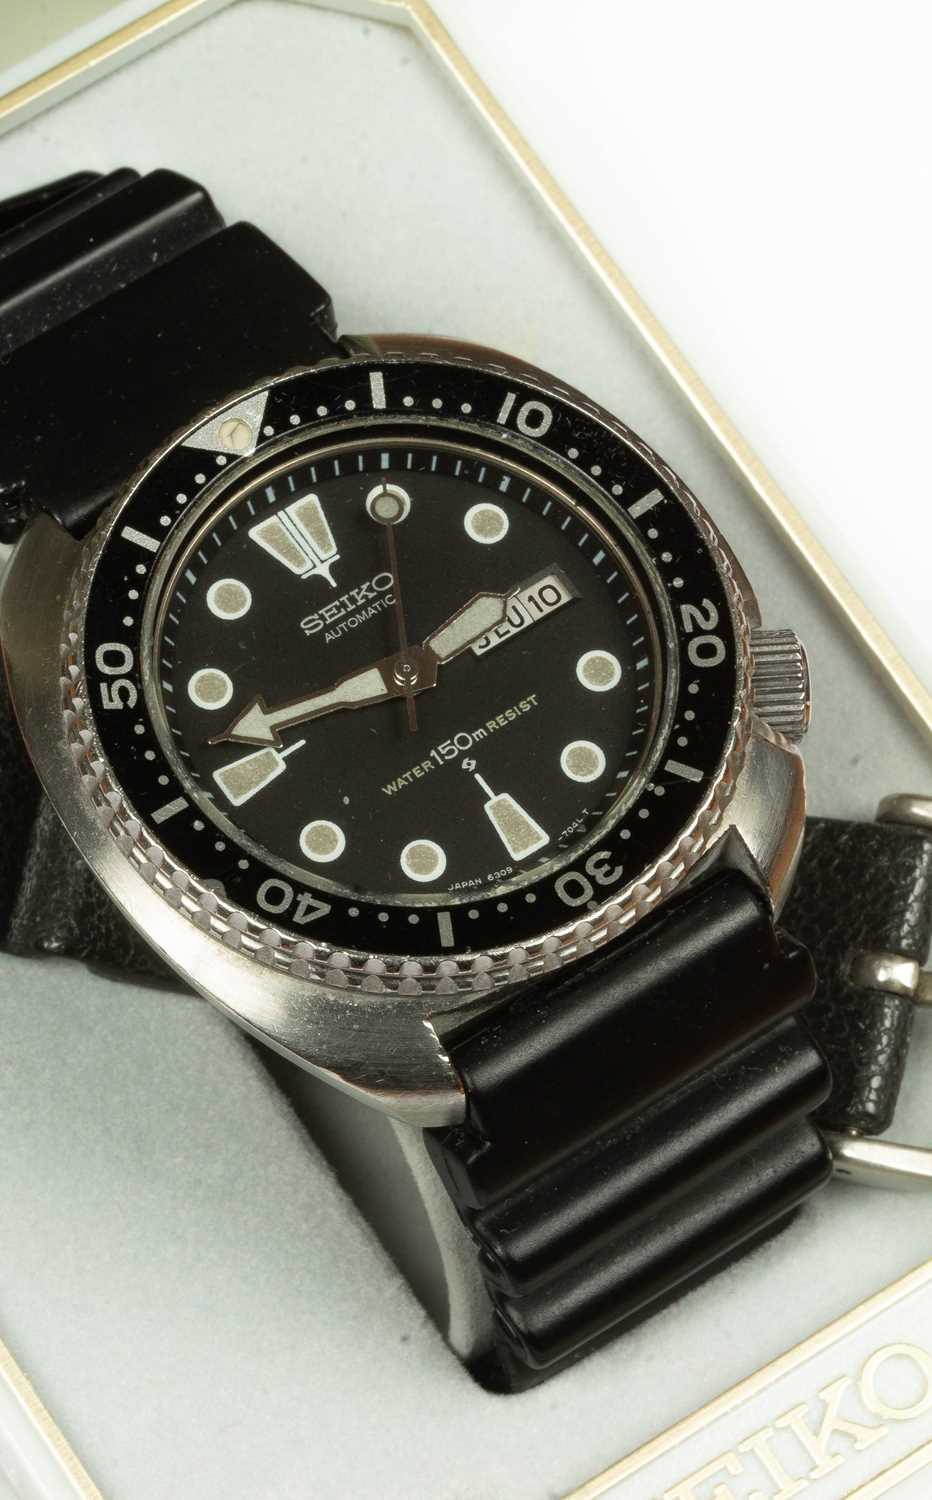 A Seiko automatic 150m stainless steel divers watch